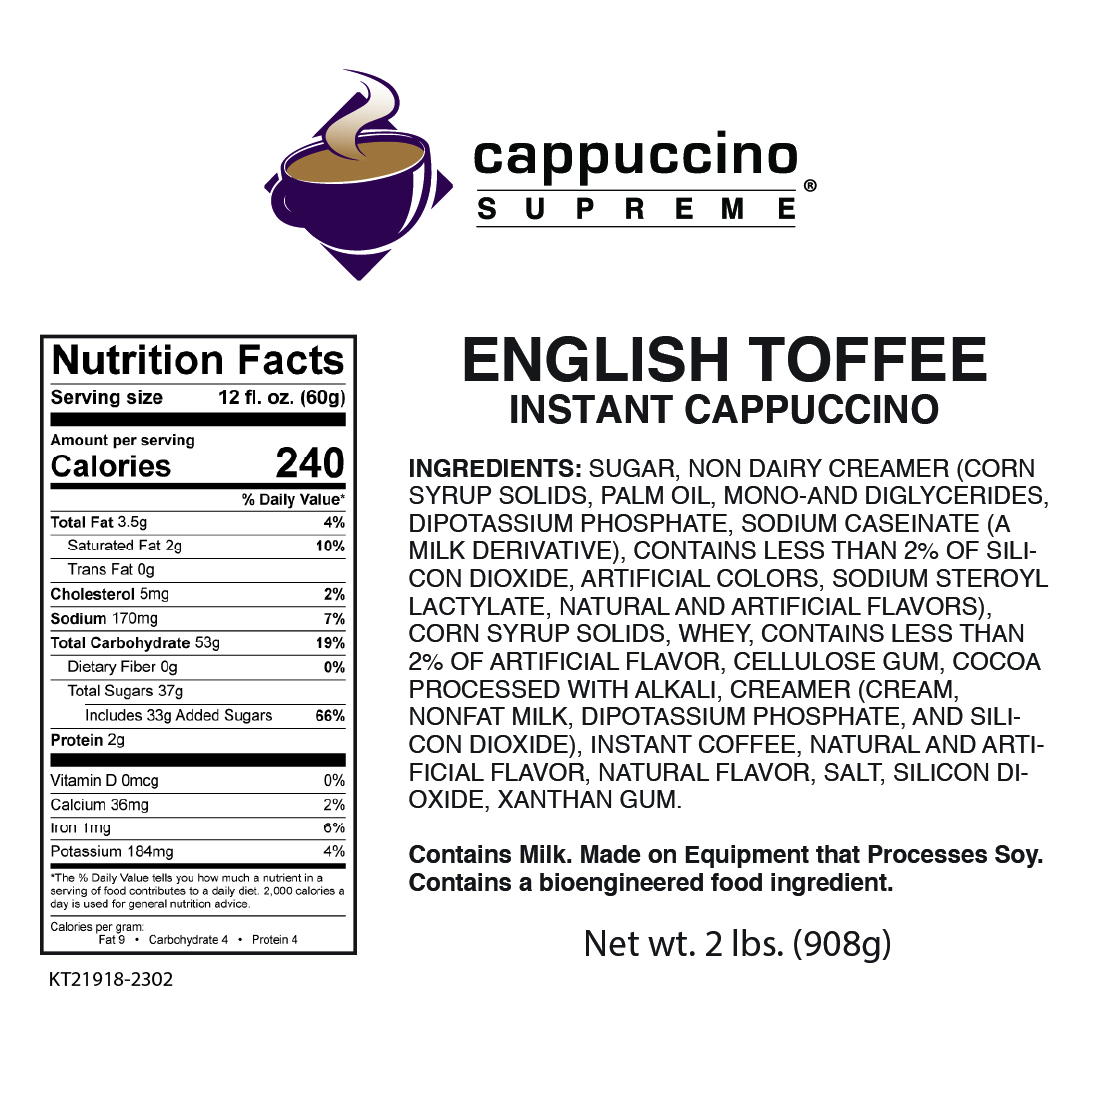 English toffee Cappuccino Supreme nutrition and ingredients